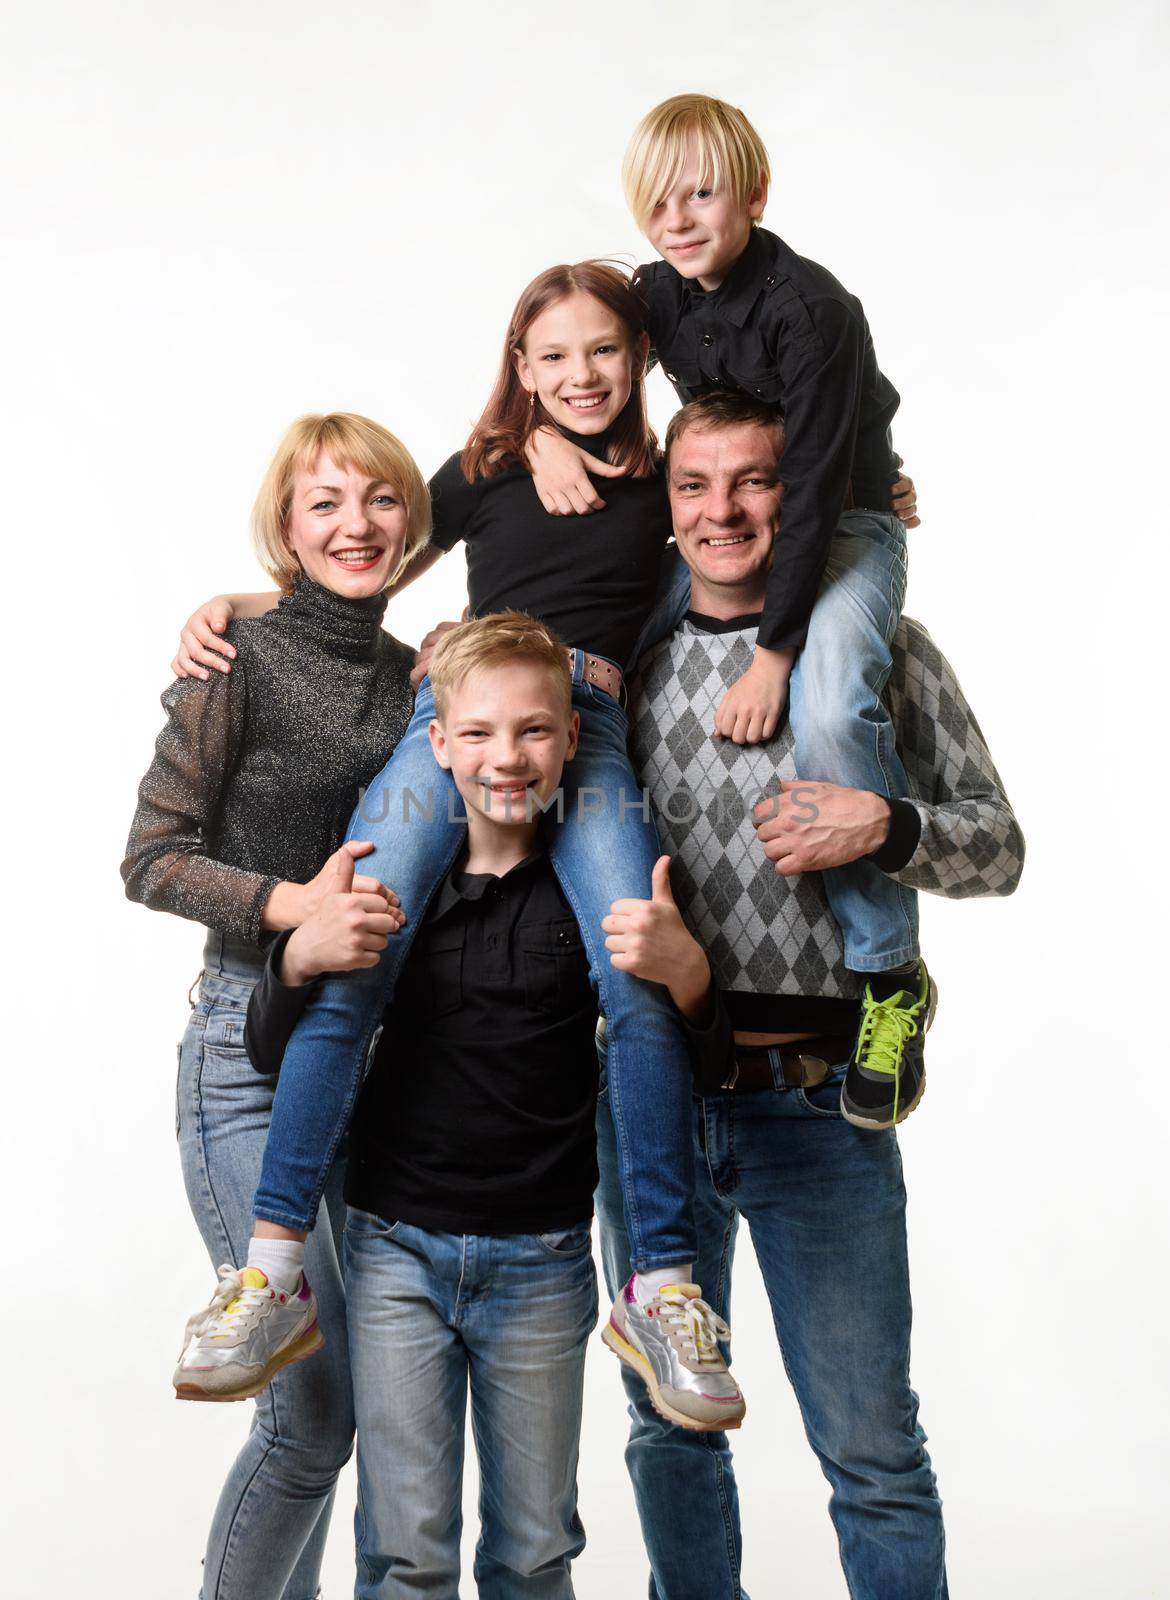 Portrait of a large family with teenagers in casual clothes on a white background by Madhourse